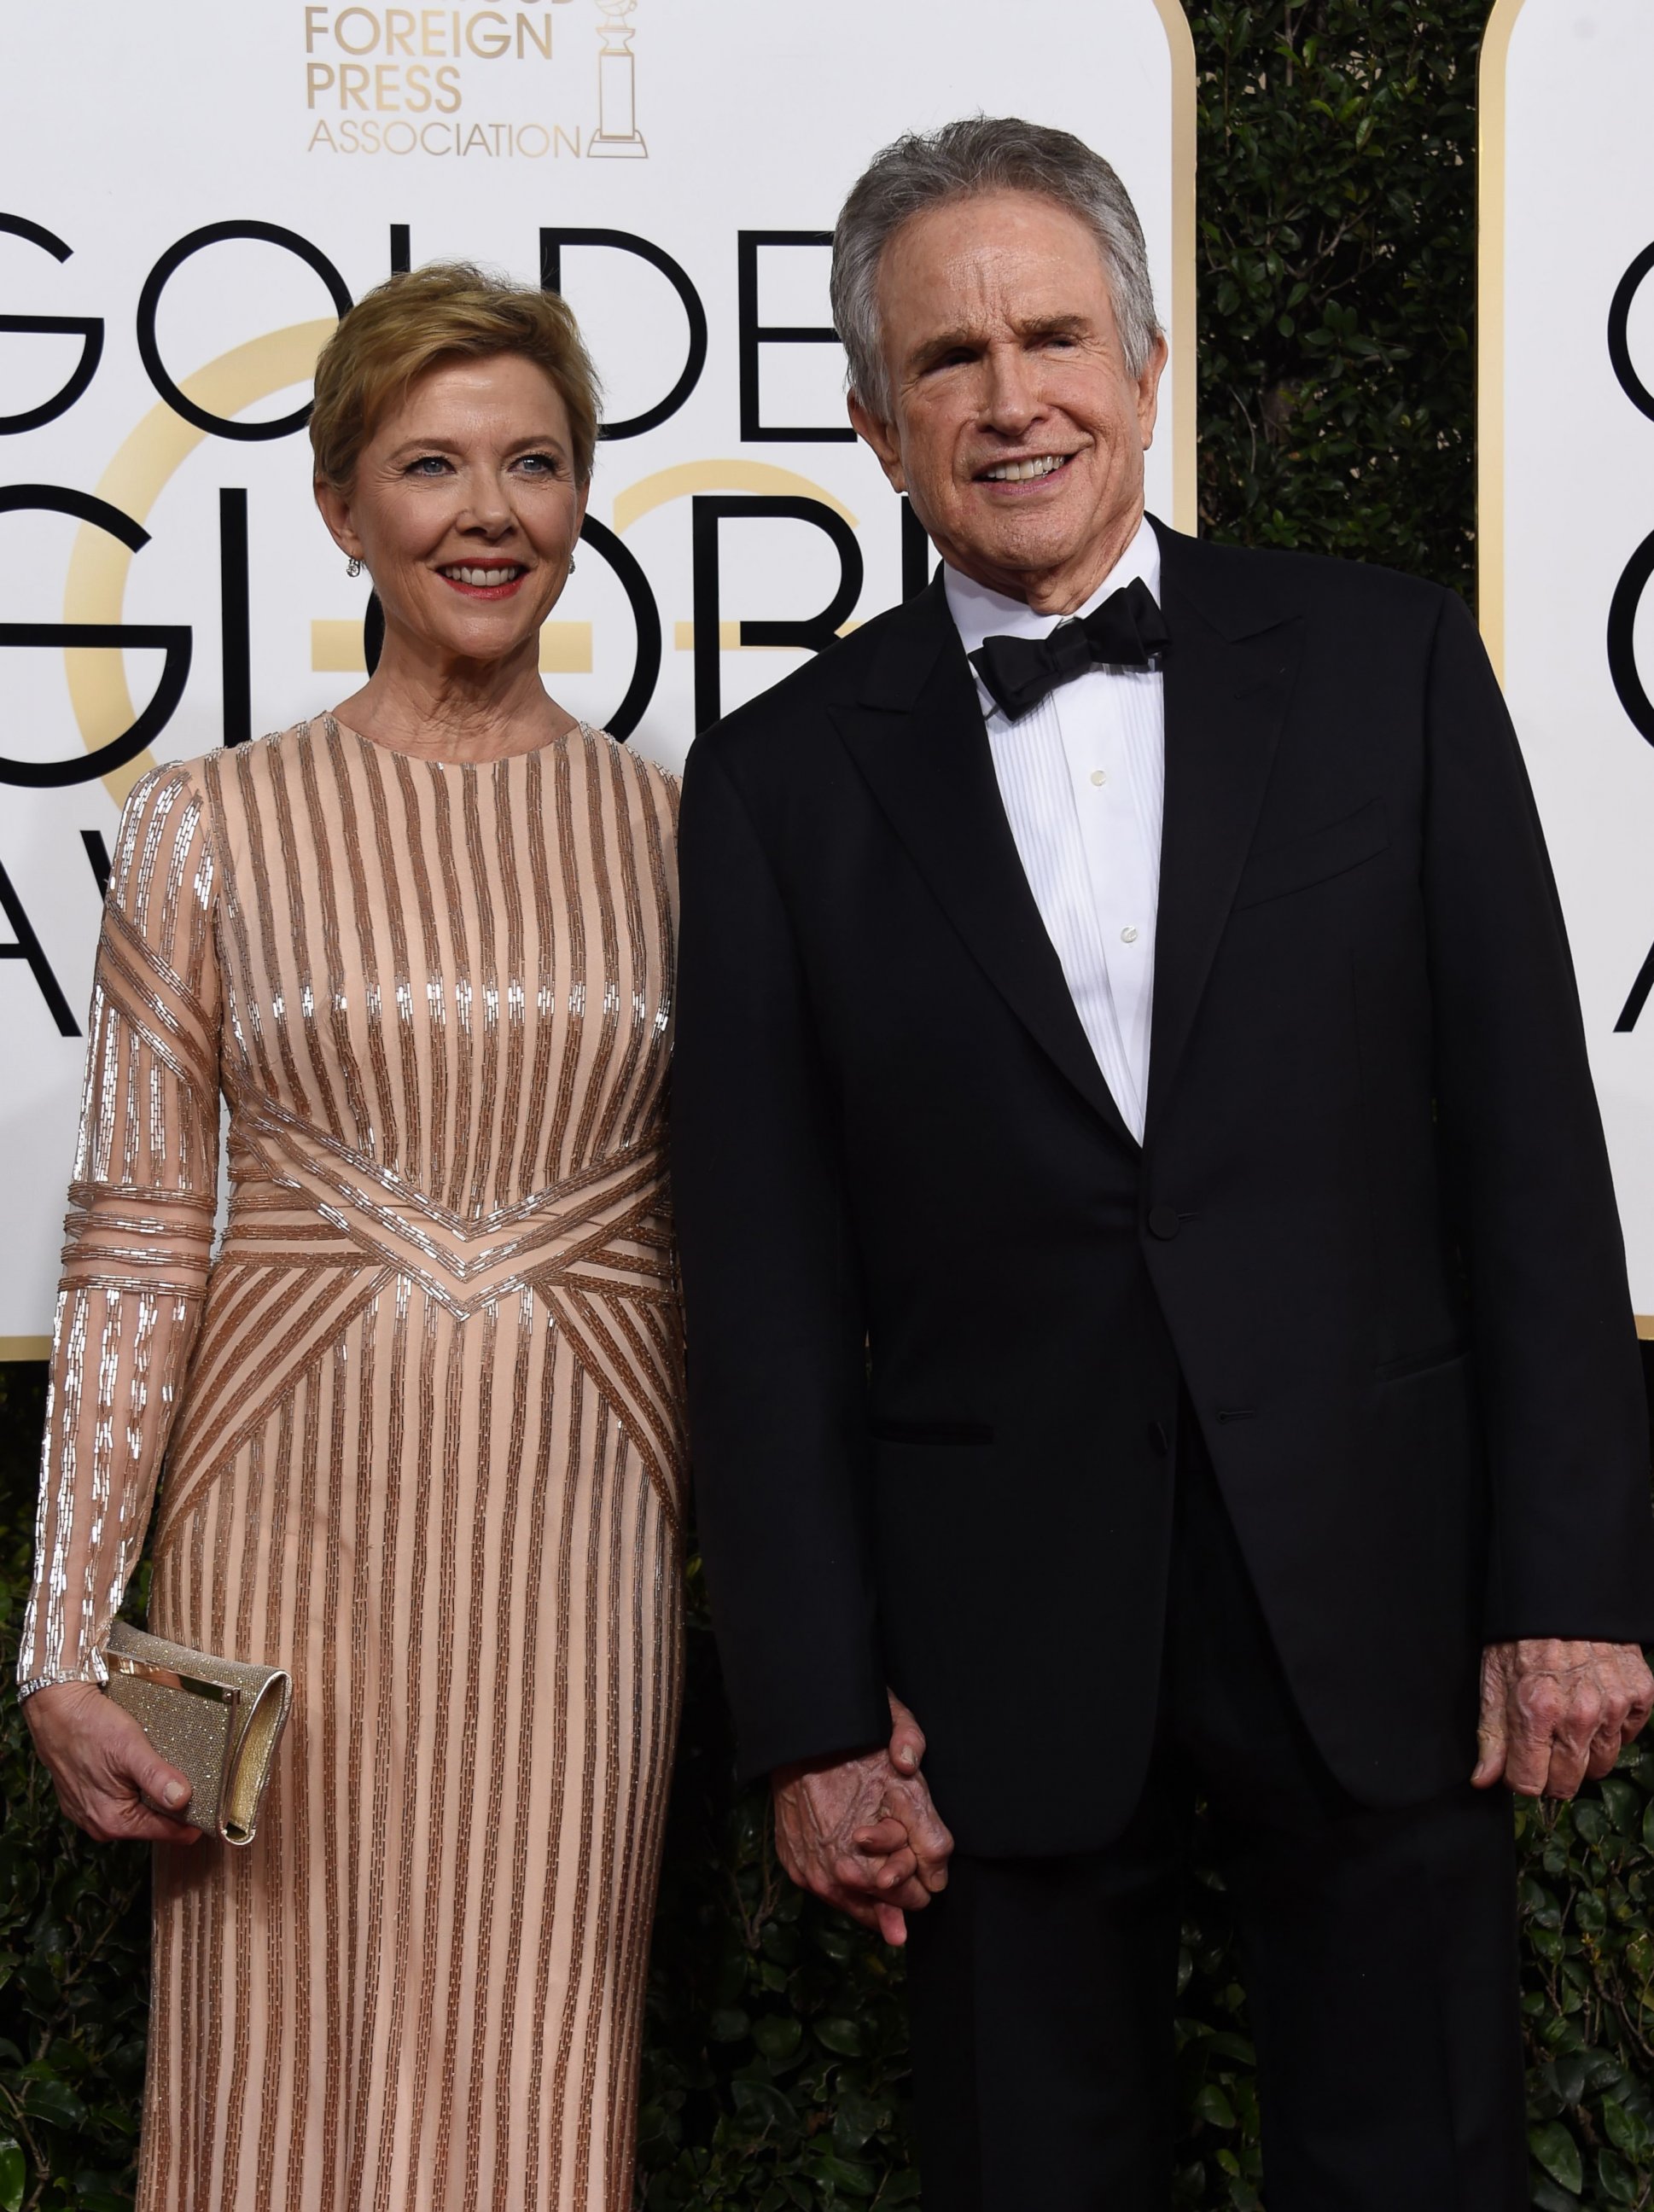 PHOTO: Annette Bening and Warren Beatty arrive at the 74th annual Golden Globe Awards, Jan. 8, 2017, at the Beverly Hilton Hotel in Beverly Hills, Calif.